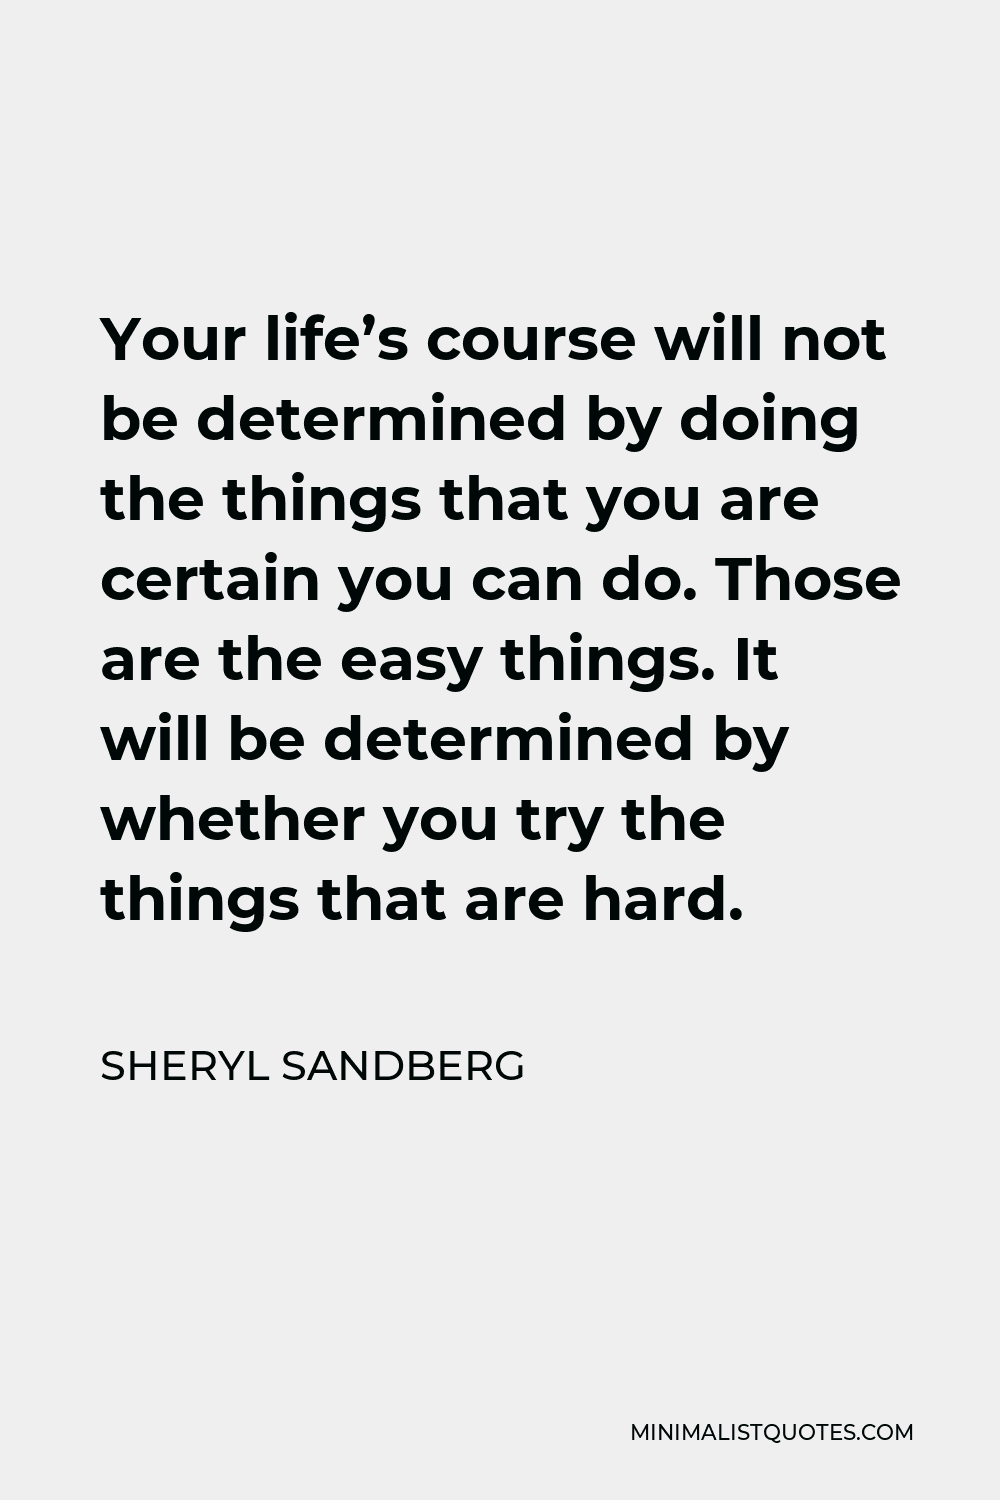 Sheryl Sandberg Quote - Your life’s course will not be determined by doing the things that you are certain you can do. Those are the easy things. It will be determined by whether you try the things that are hard.